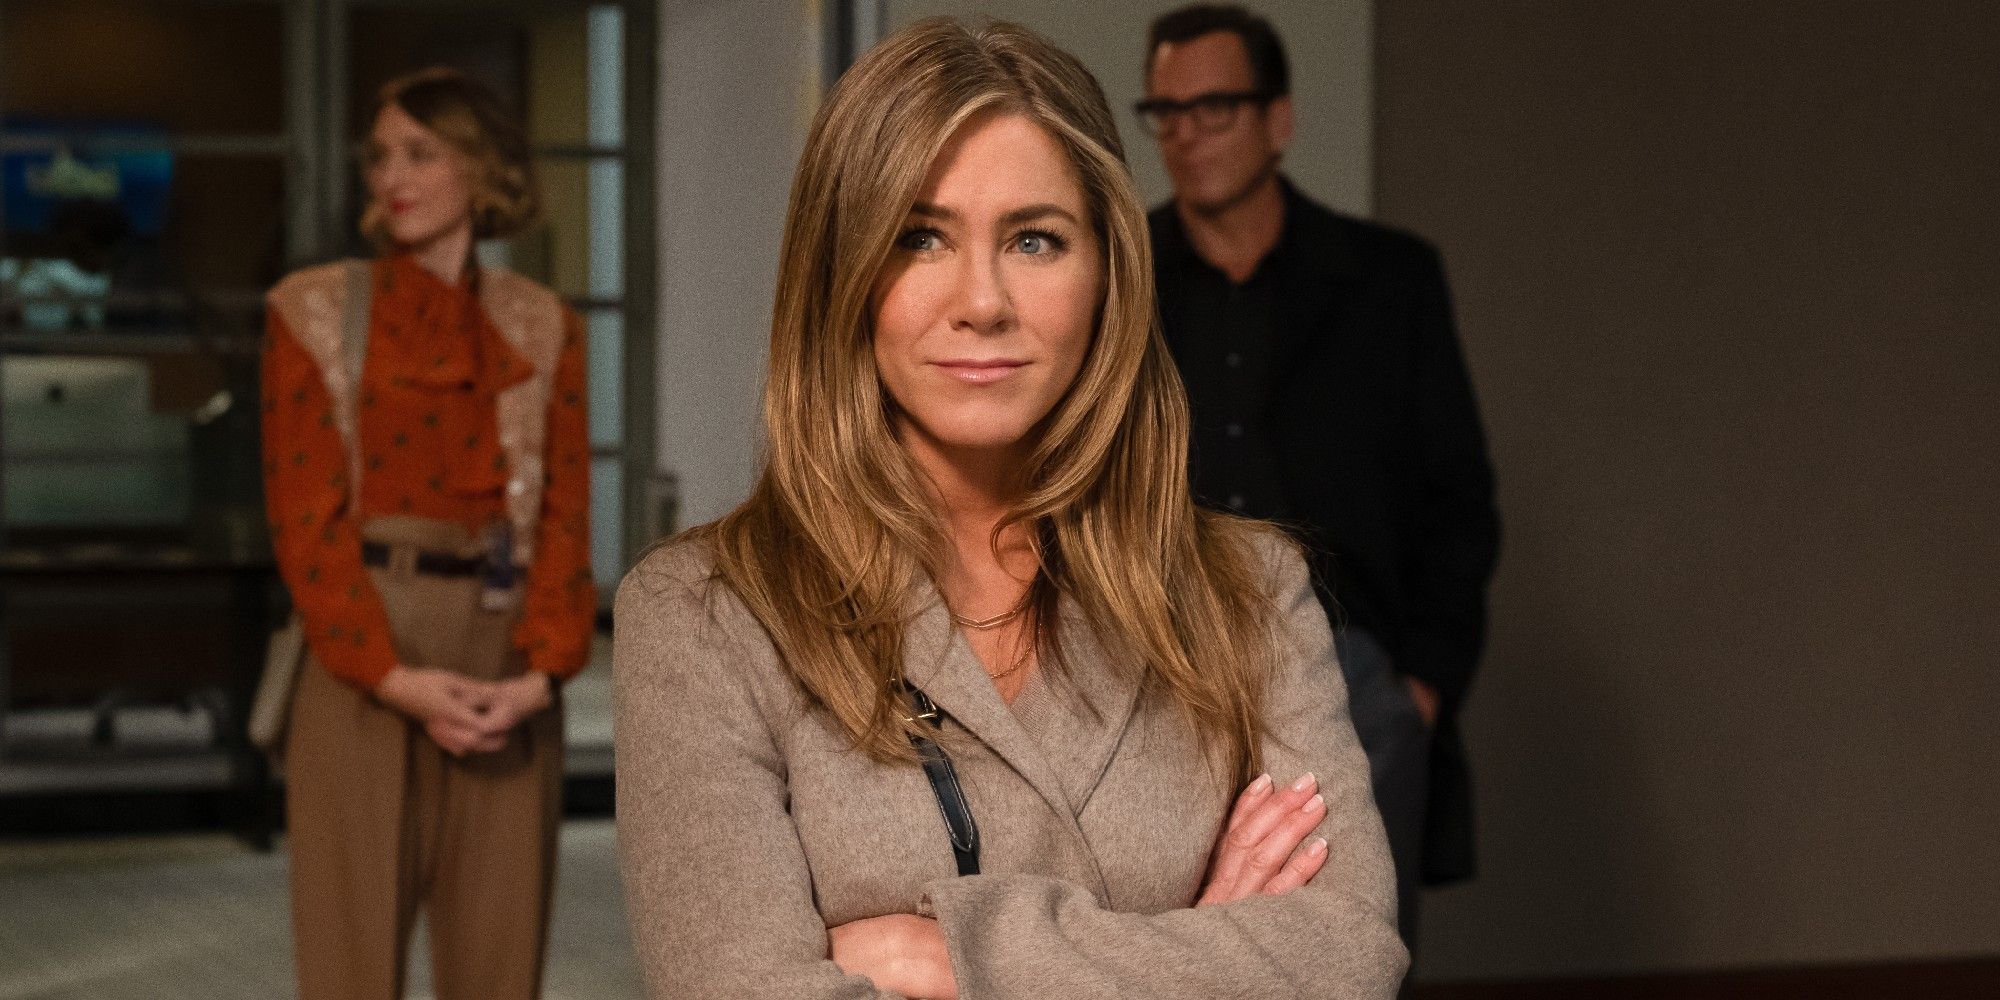 Friends Why Rachel Is Still Jennifer Aniston's Most Iconic Role (Even